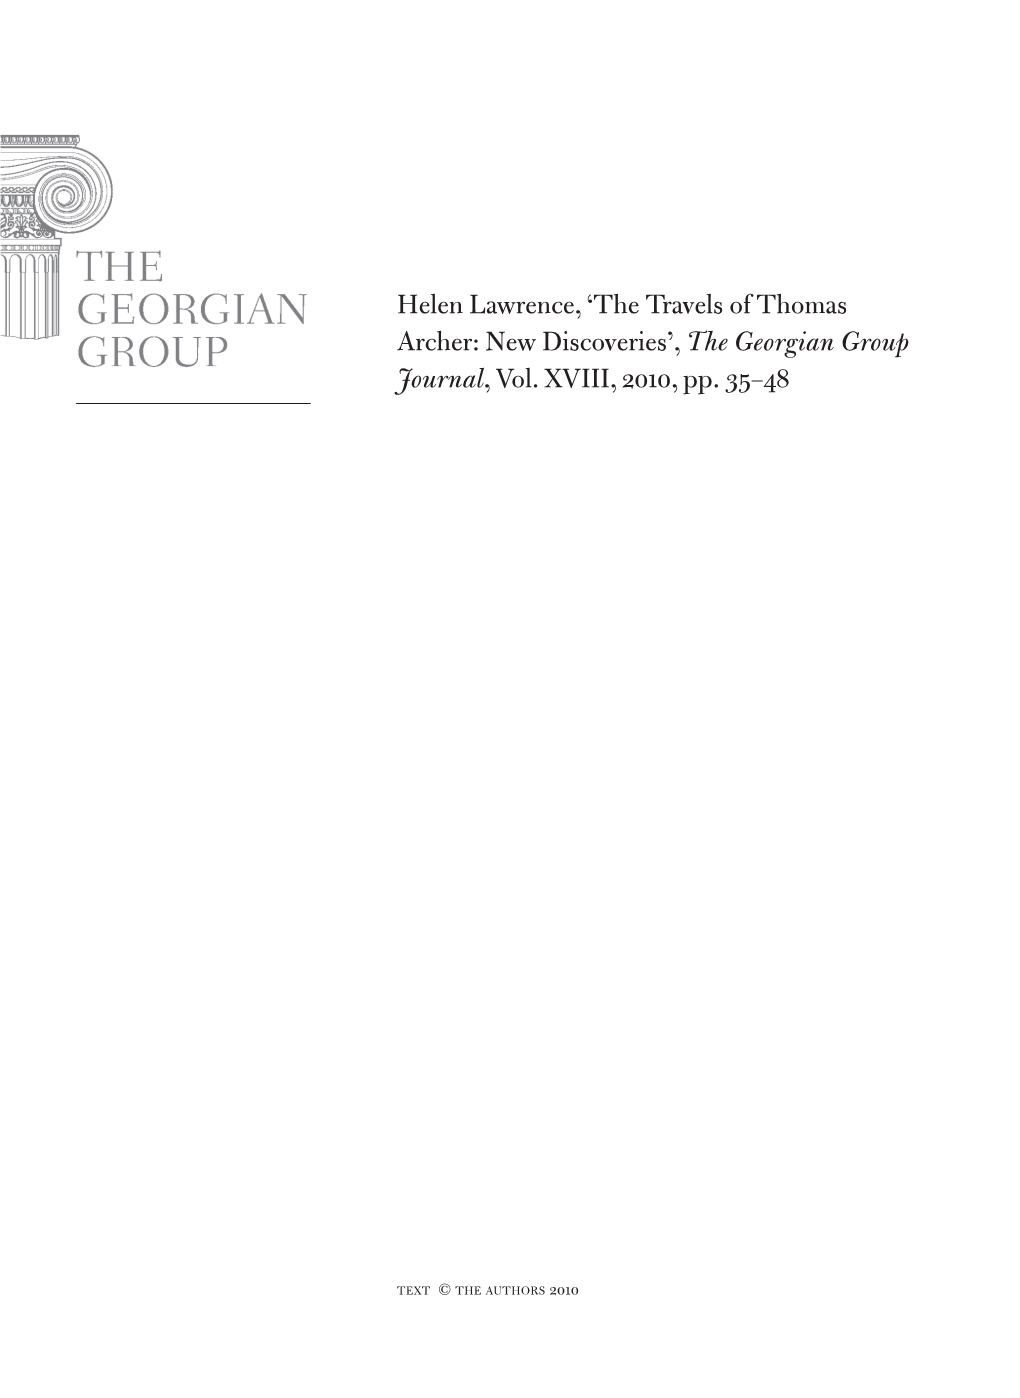 Helen Lawrence, ‘The Travels of Thomas Archer: New Discoveries’, the Georgian Group Journal, Vol